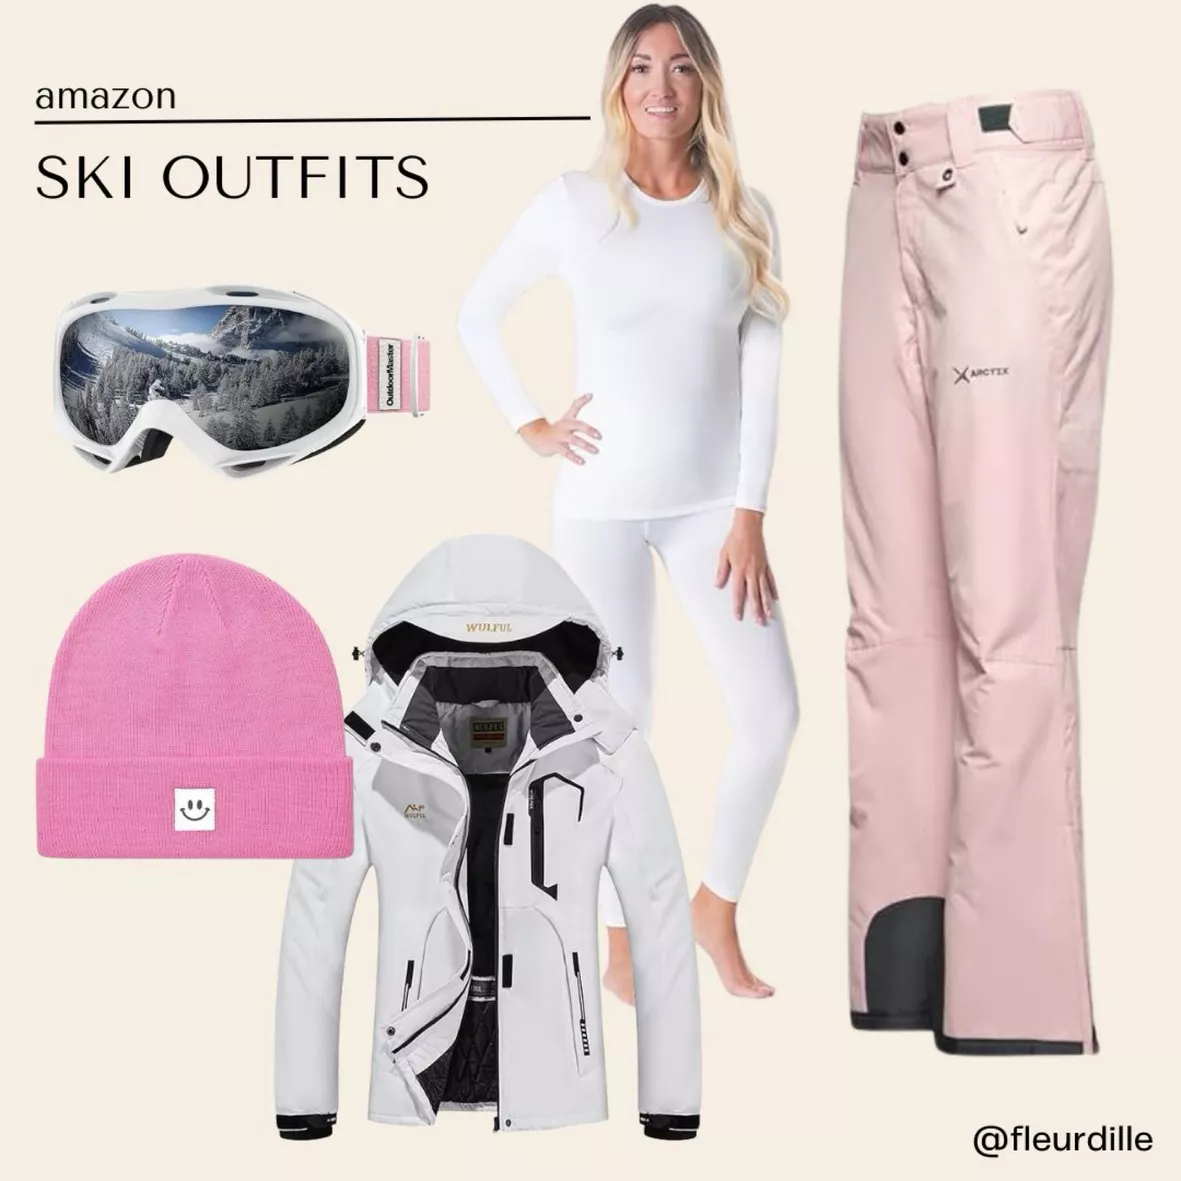 Arctix womens Insulated Snow Pants curated on LTK